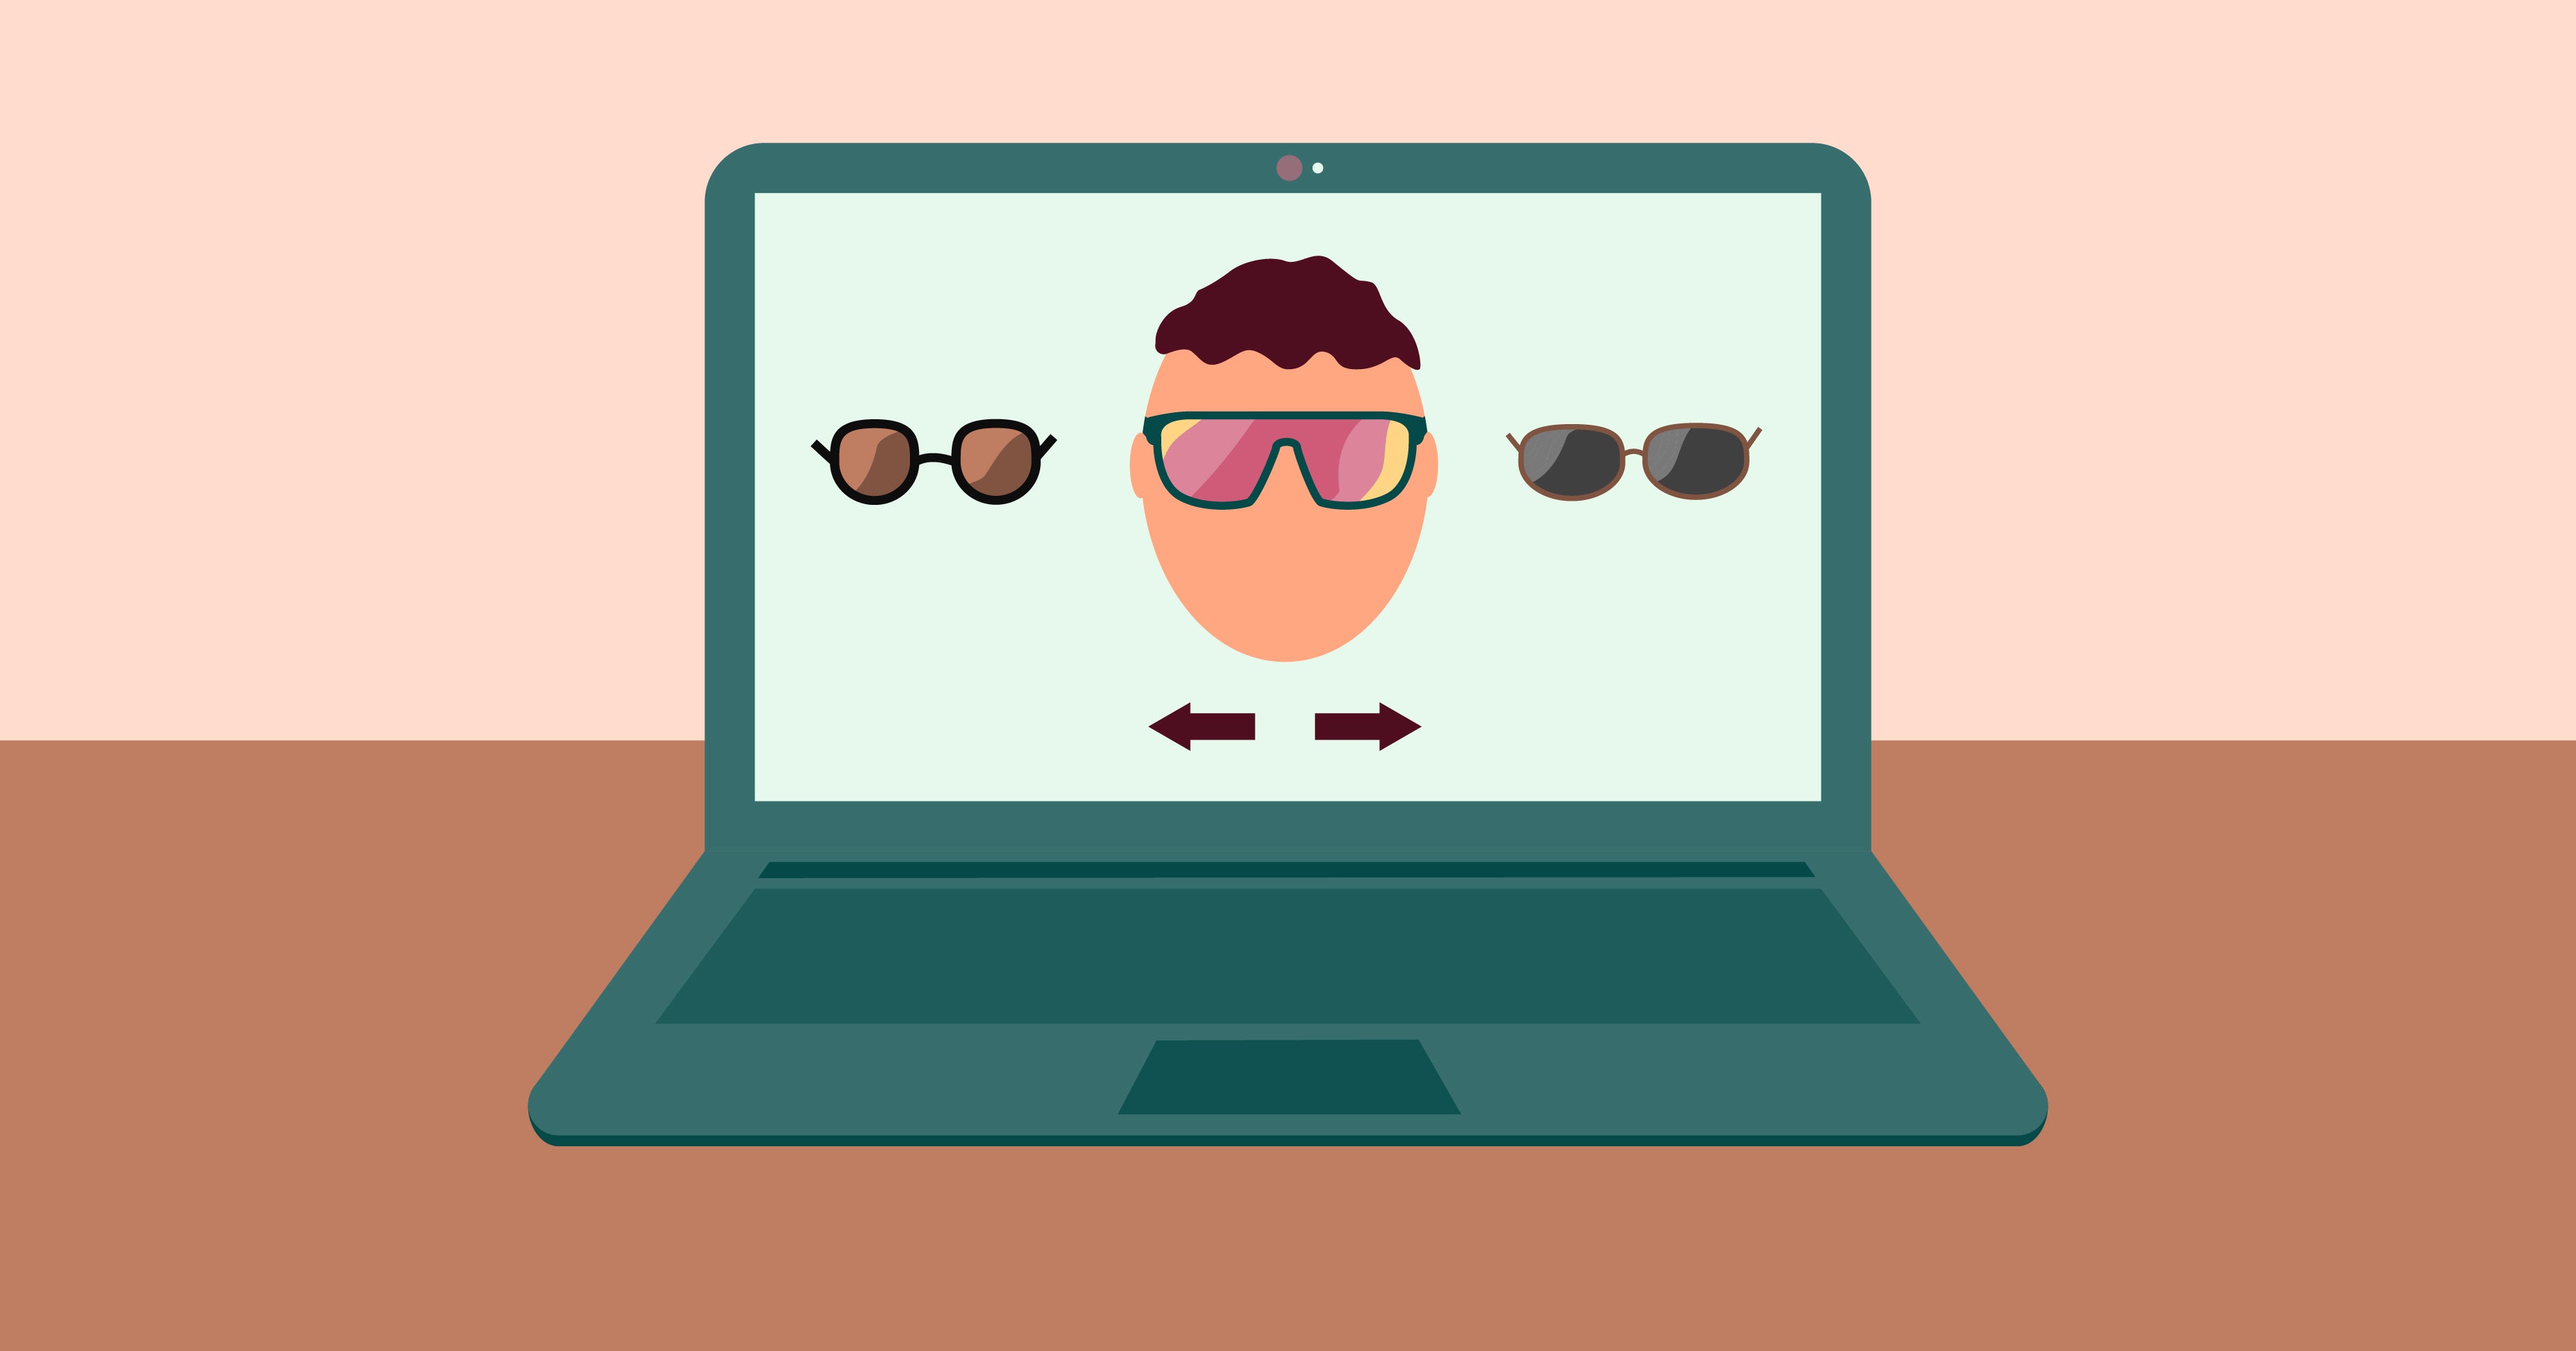 a face trying on different sunglasses on a computer representing try before you buy programs